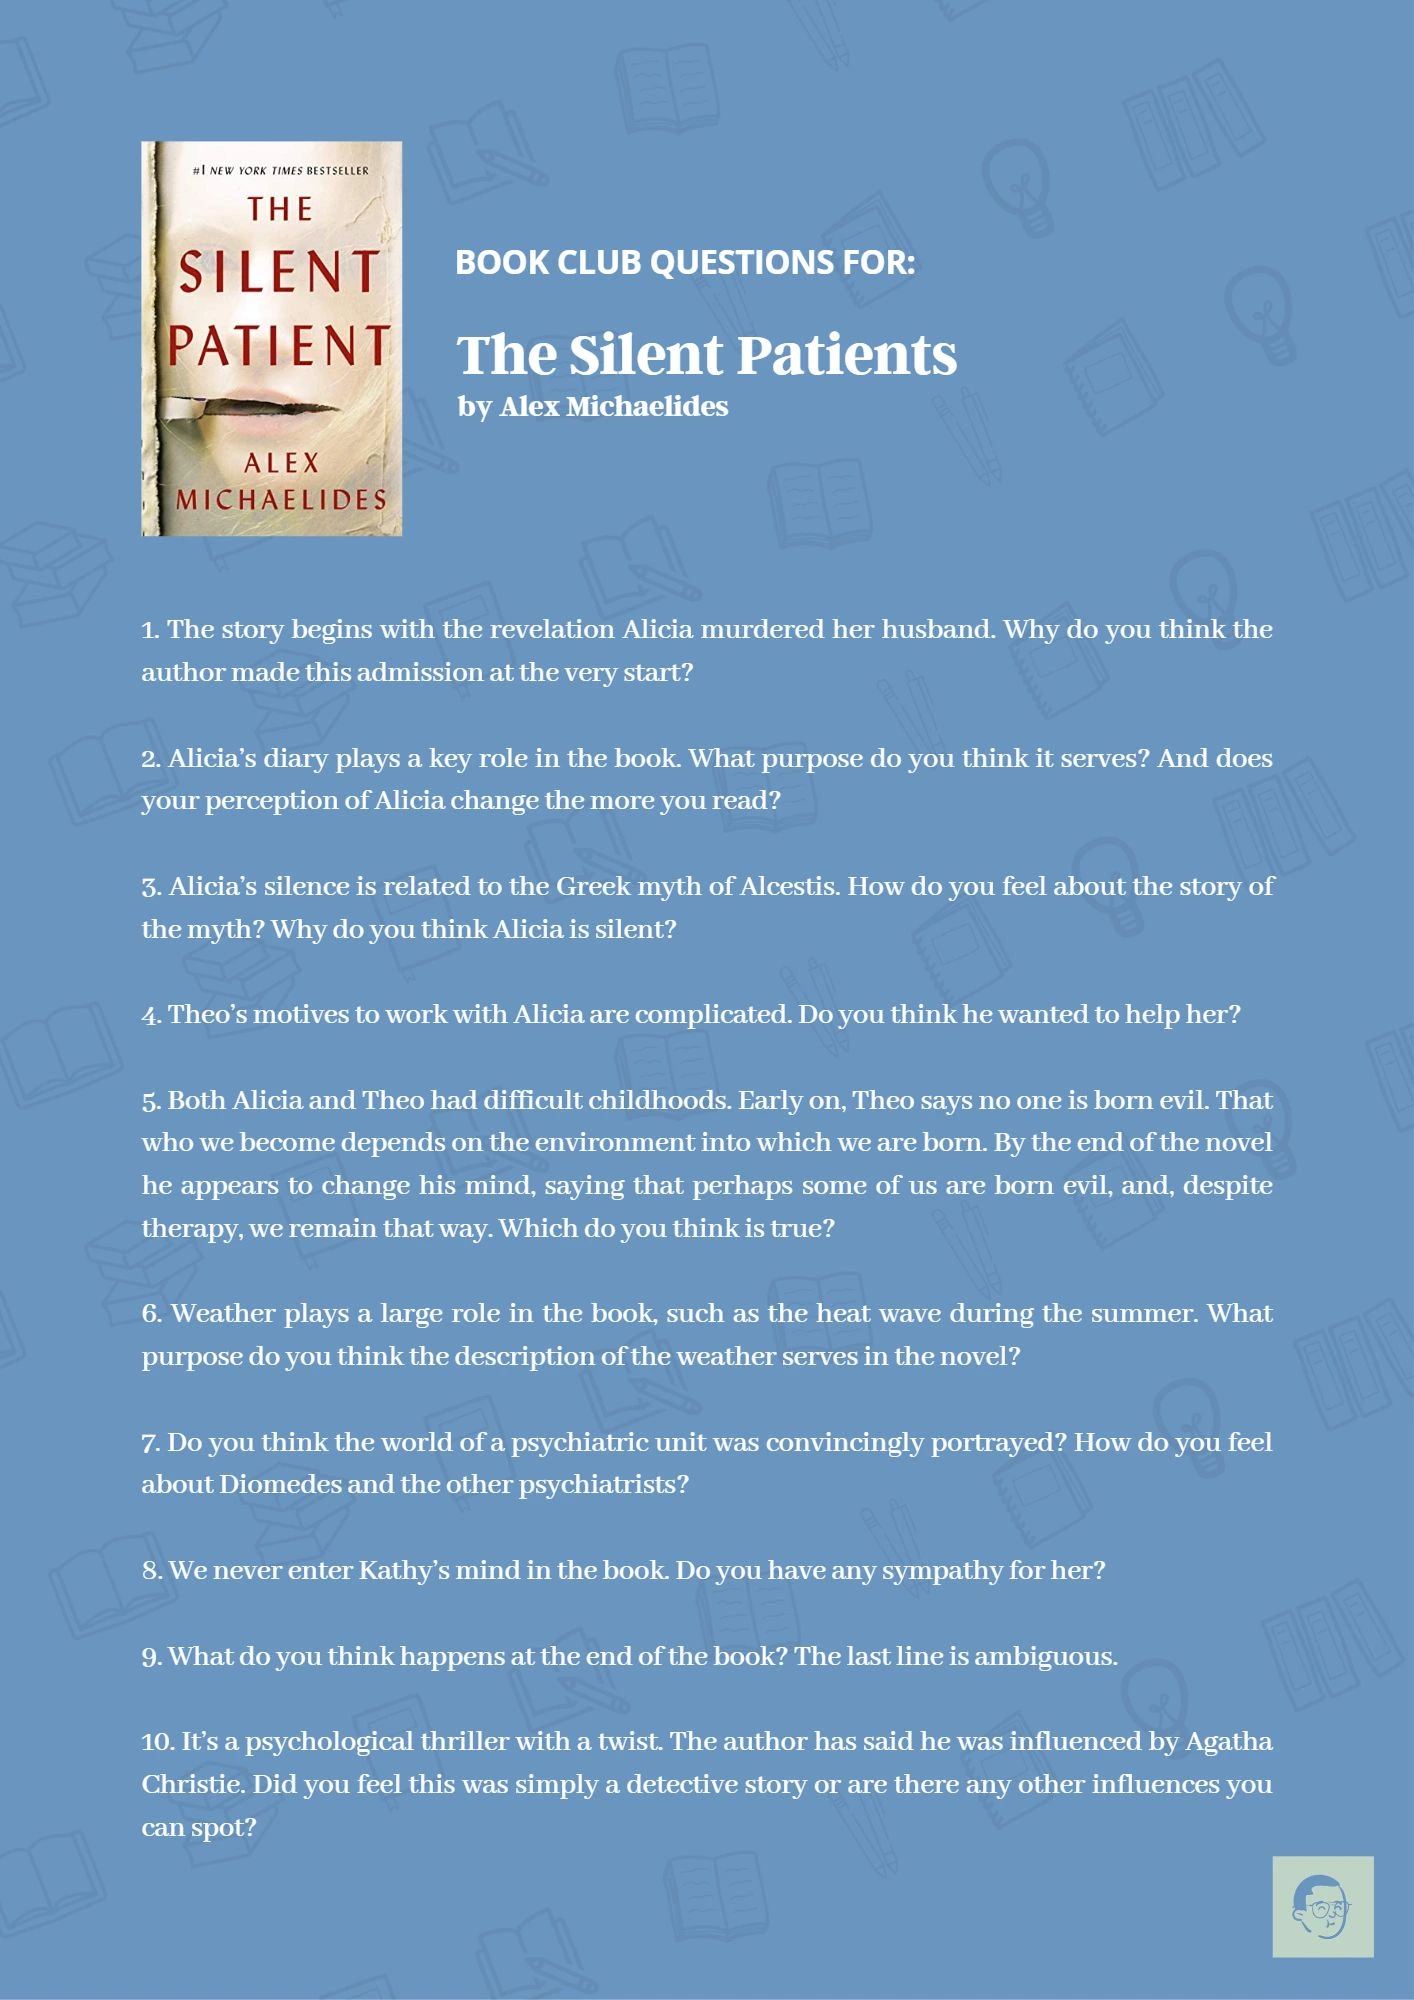 The Silent Patient book club questions (printable)